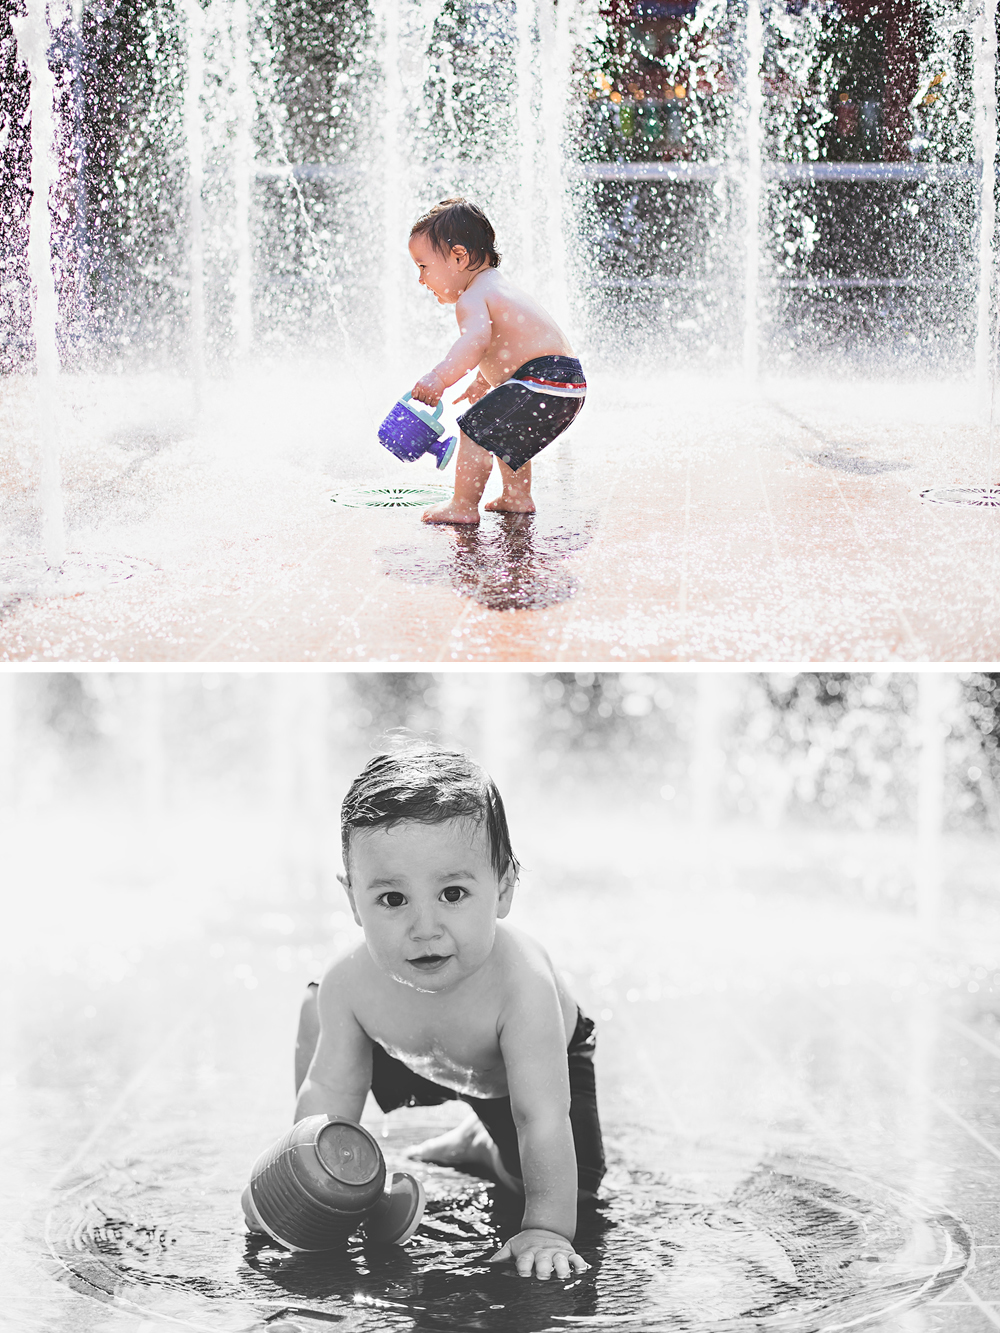 Summer lifestyle images - Tonya Teran Photography - Rockville, MD Newborn Baby and Family Photographer